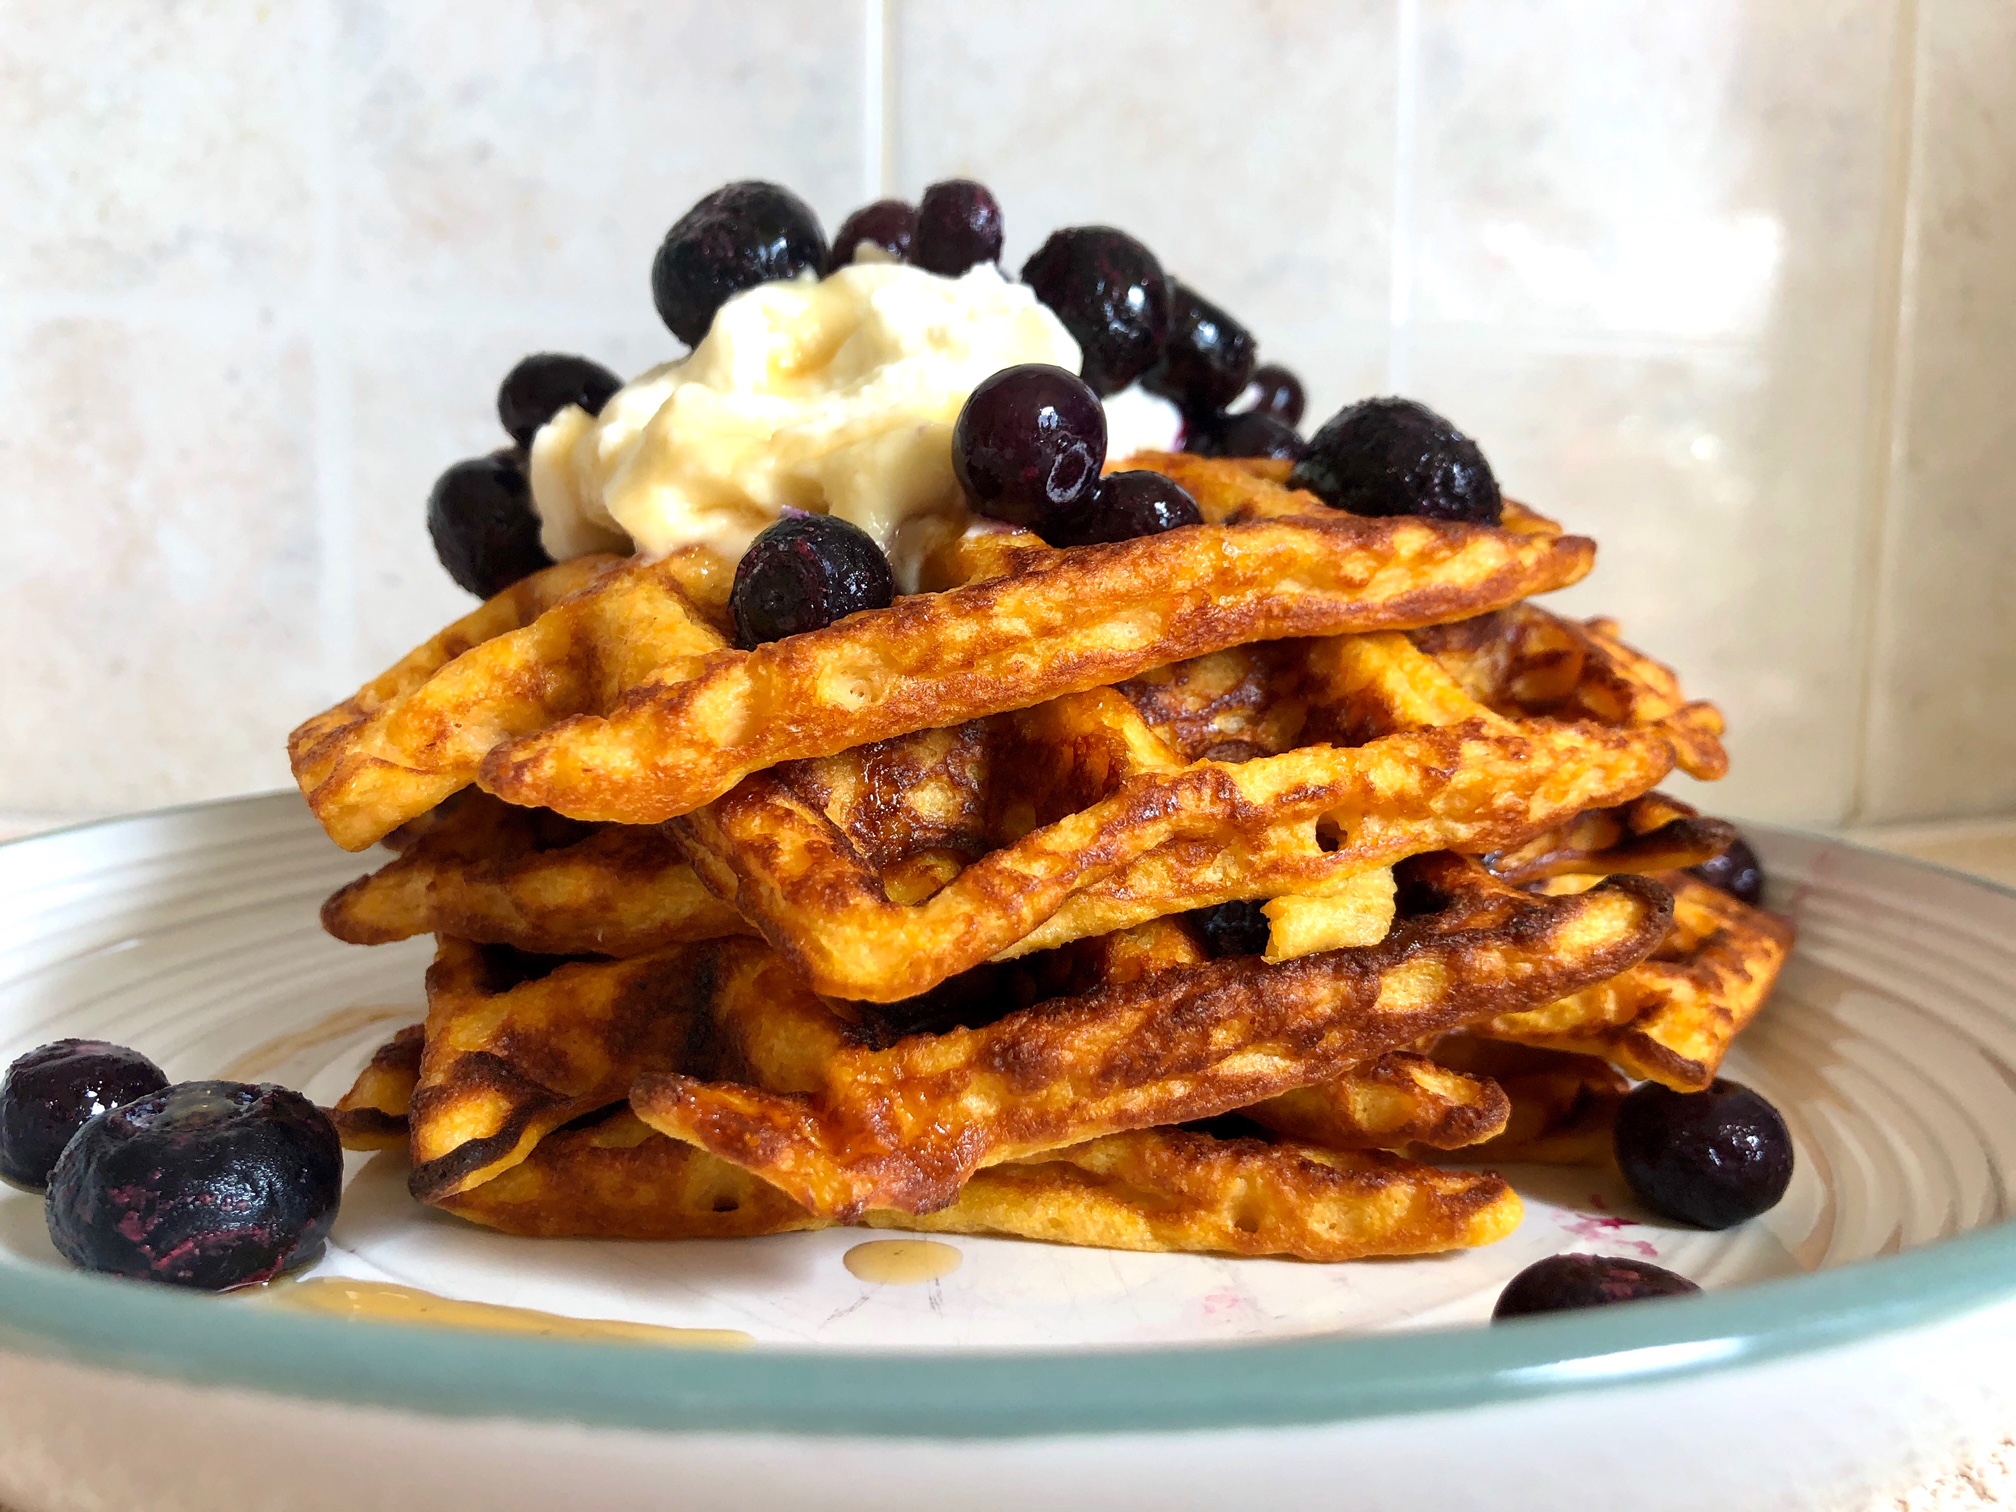 These delicious Sweet Potato Waffles are the perfect healthy fat, healthy carb meal option for breakfast, lunch or dinner!